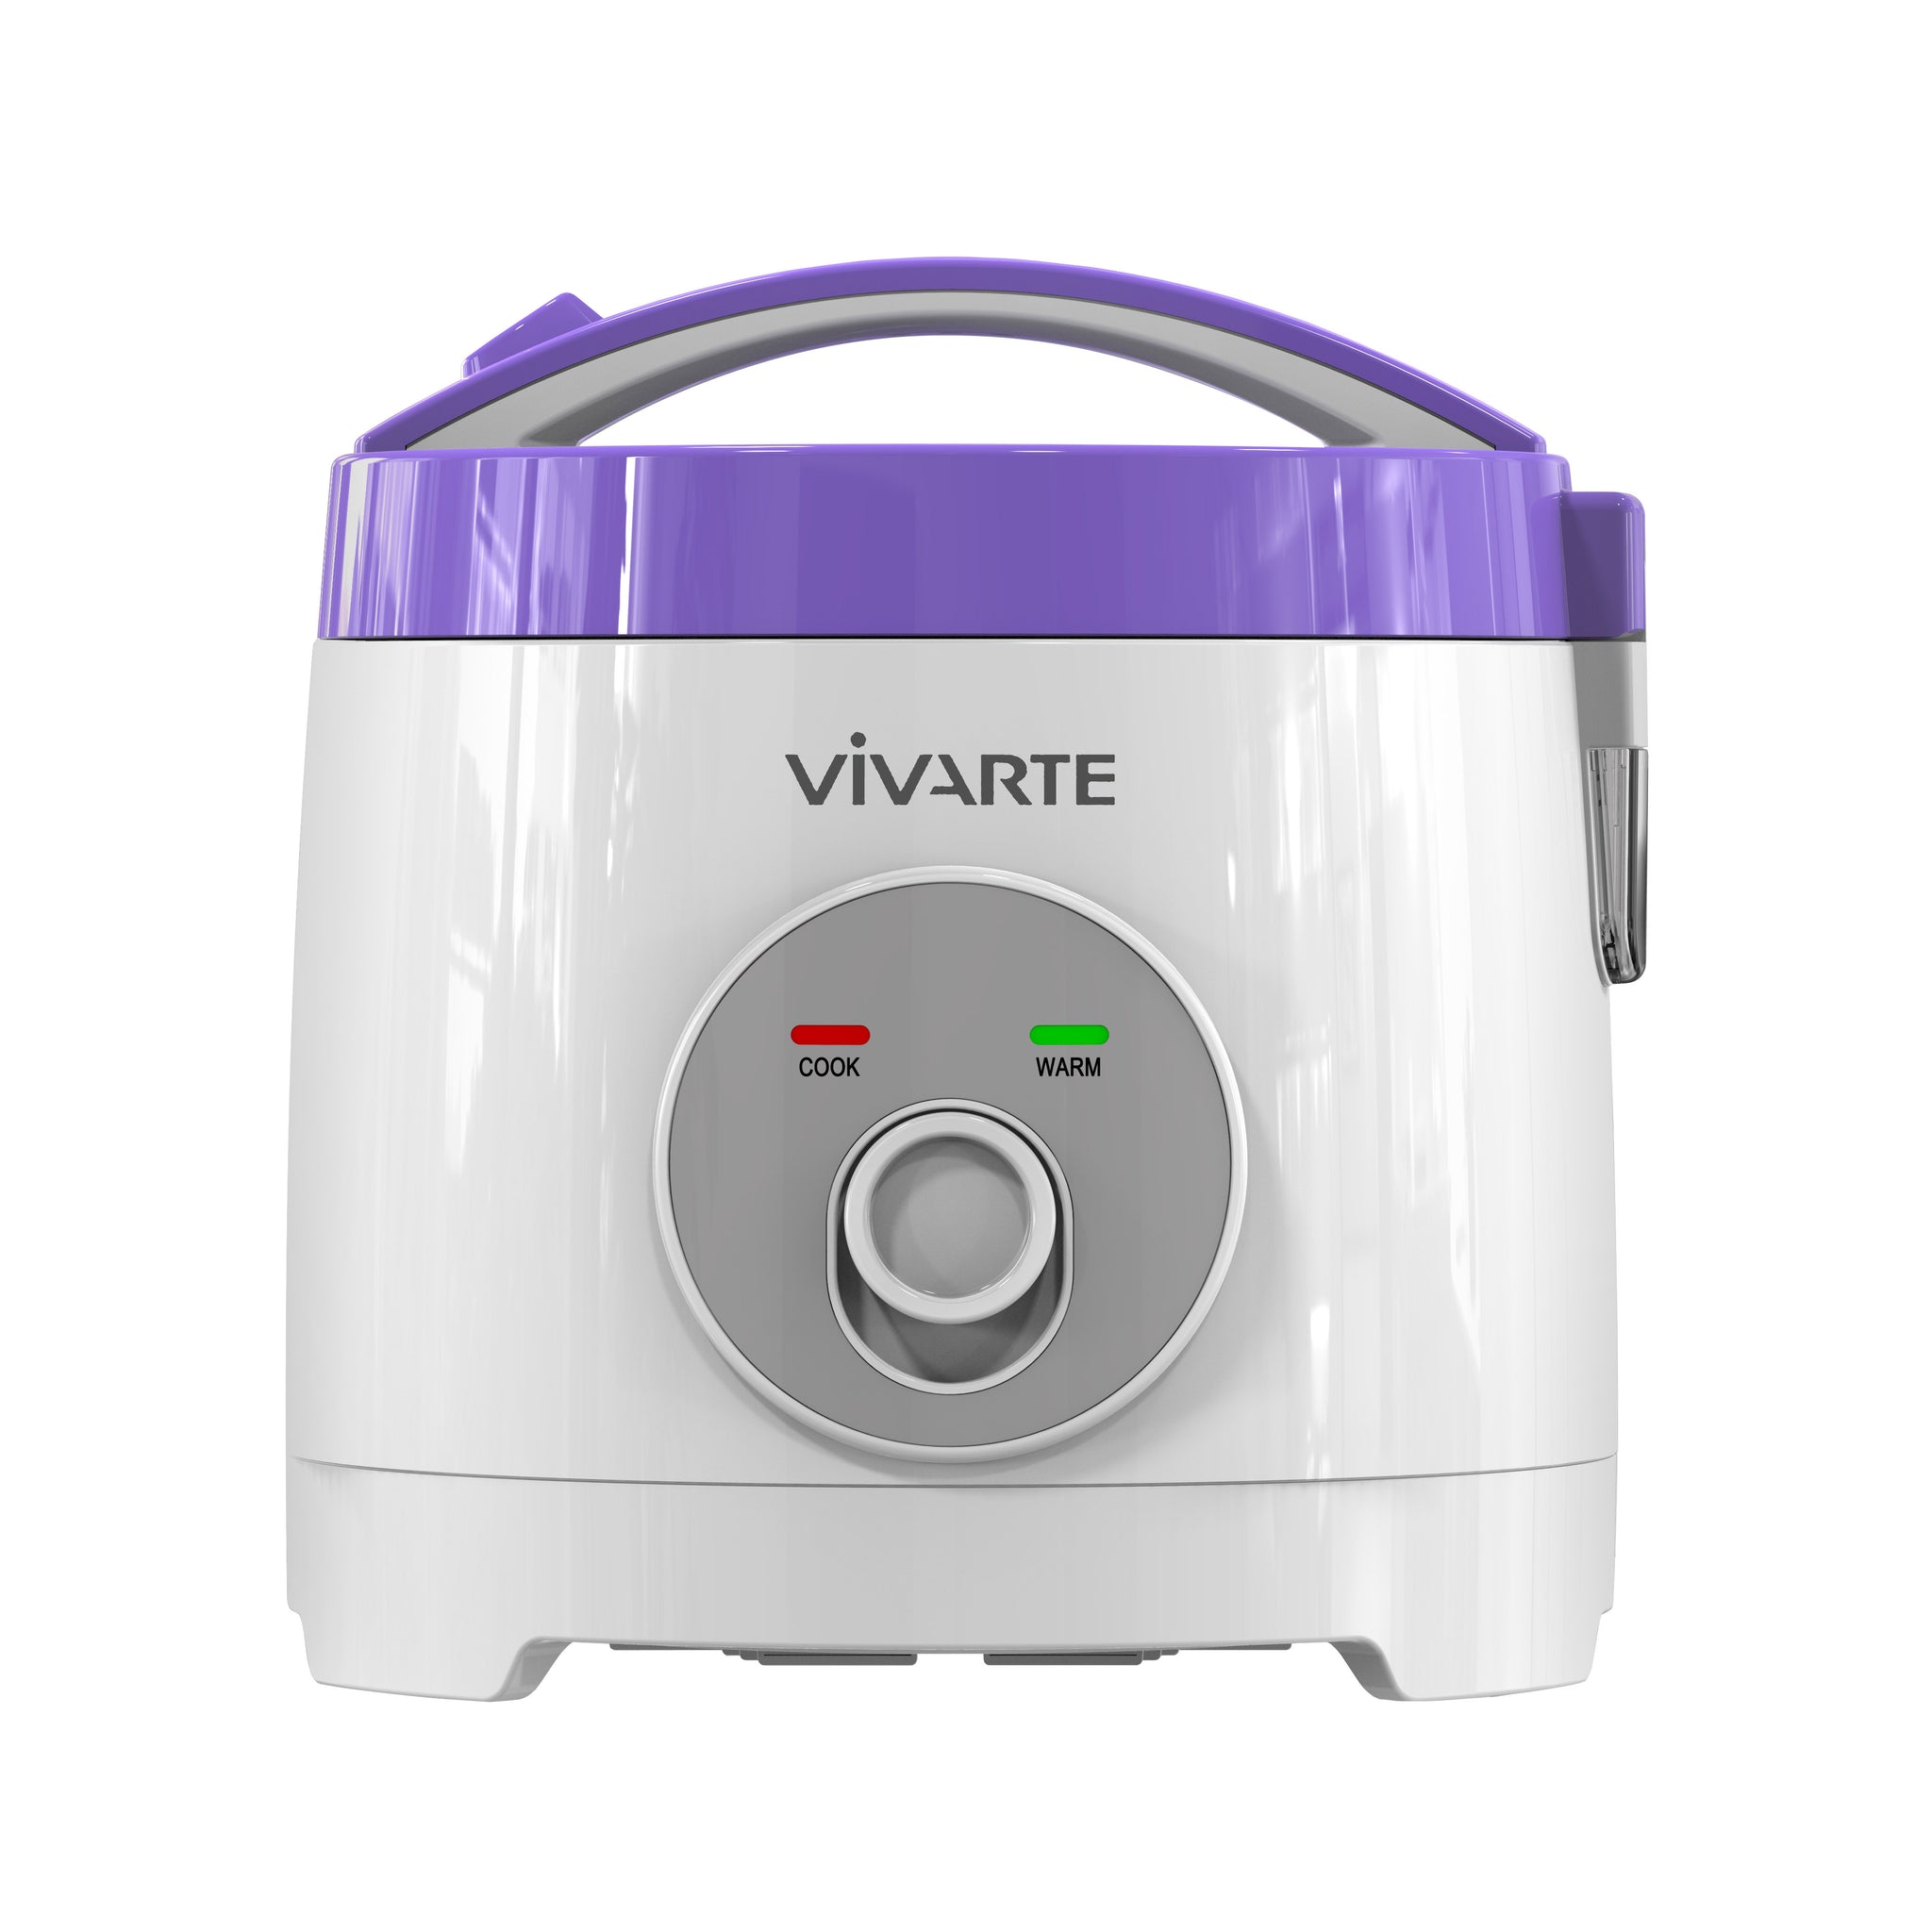 Vivarte 3CUP rice cooker VR-003N (3CUP) Free shipping (Excluding HI, AK)